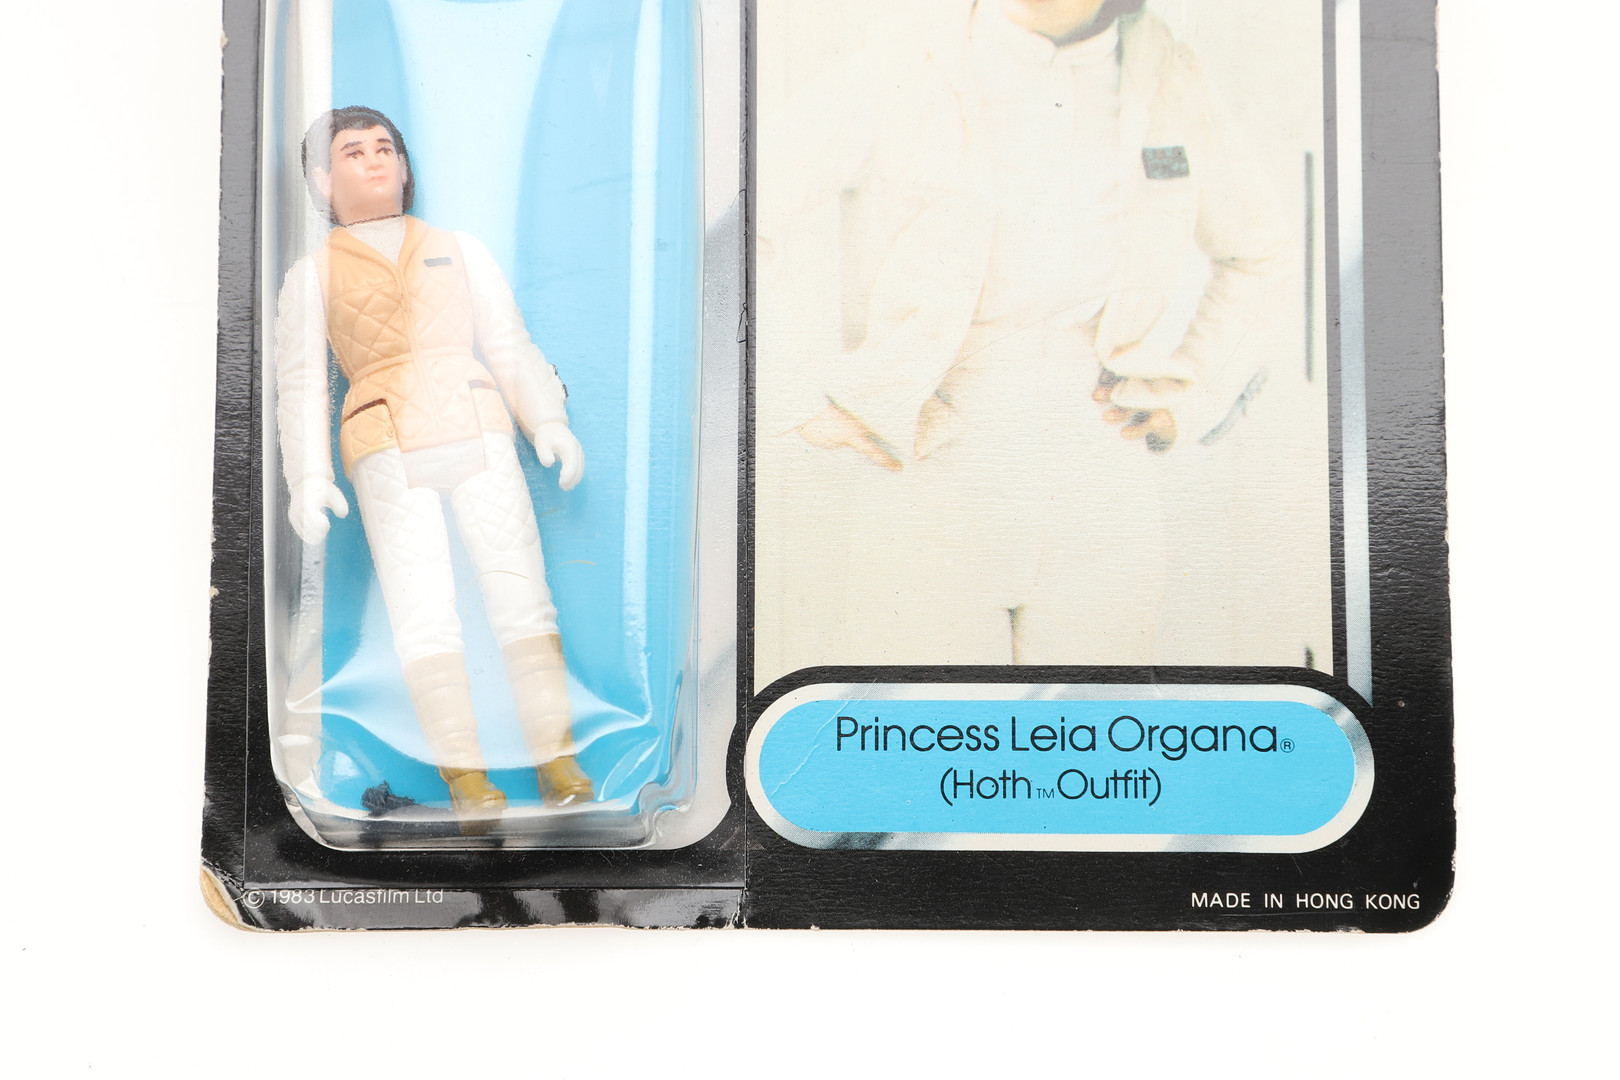 STAR WARS CARDED FIGURES BY PALITOY - HAN SOLO & PRINCESS LEIA. - Image 14 of 18